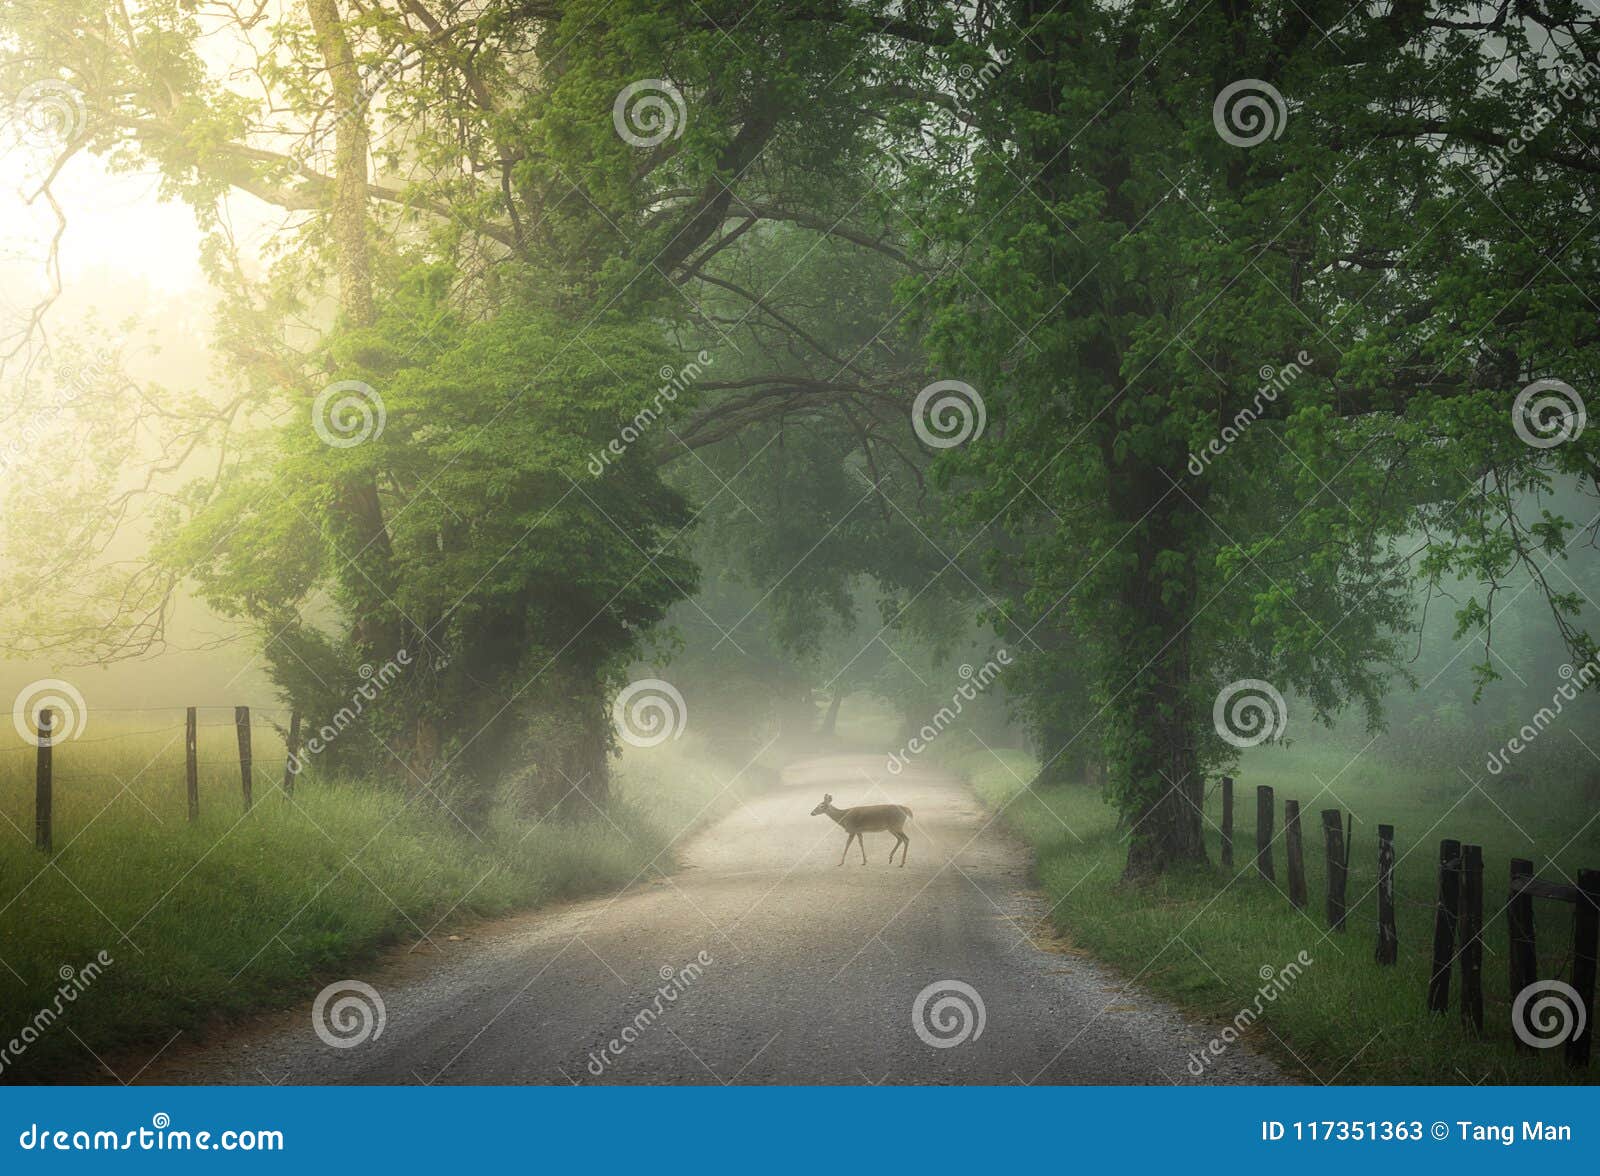 deer crossing cade`s cove on a beautiful foggy sunrise morning in tennessee.